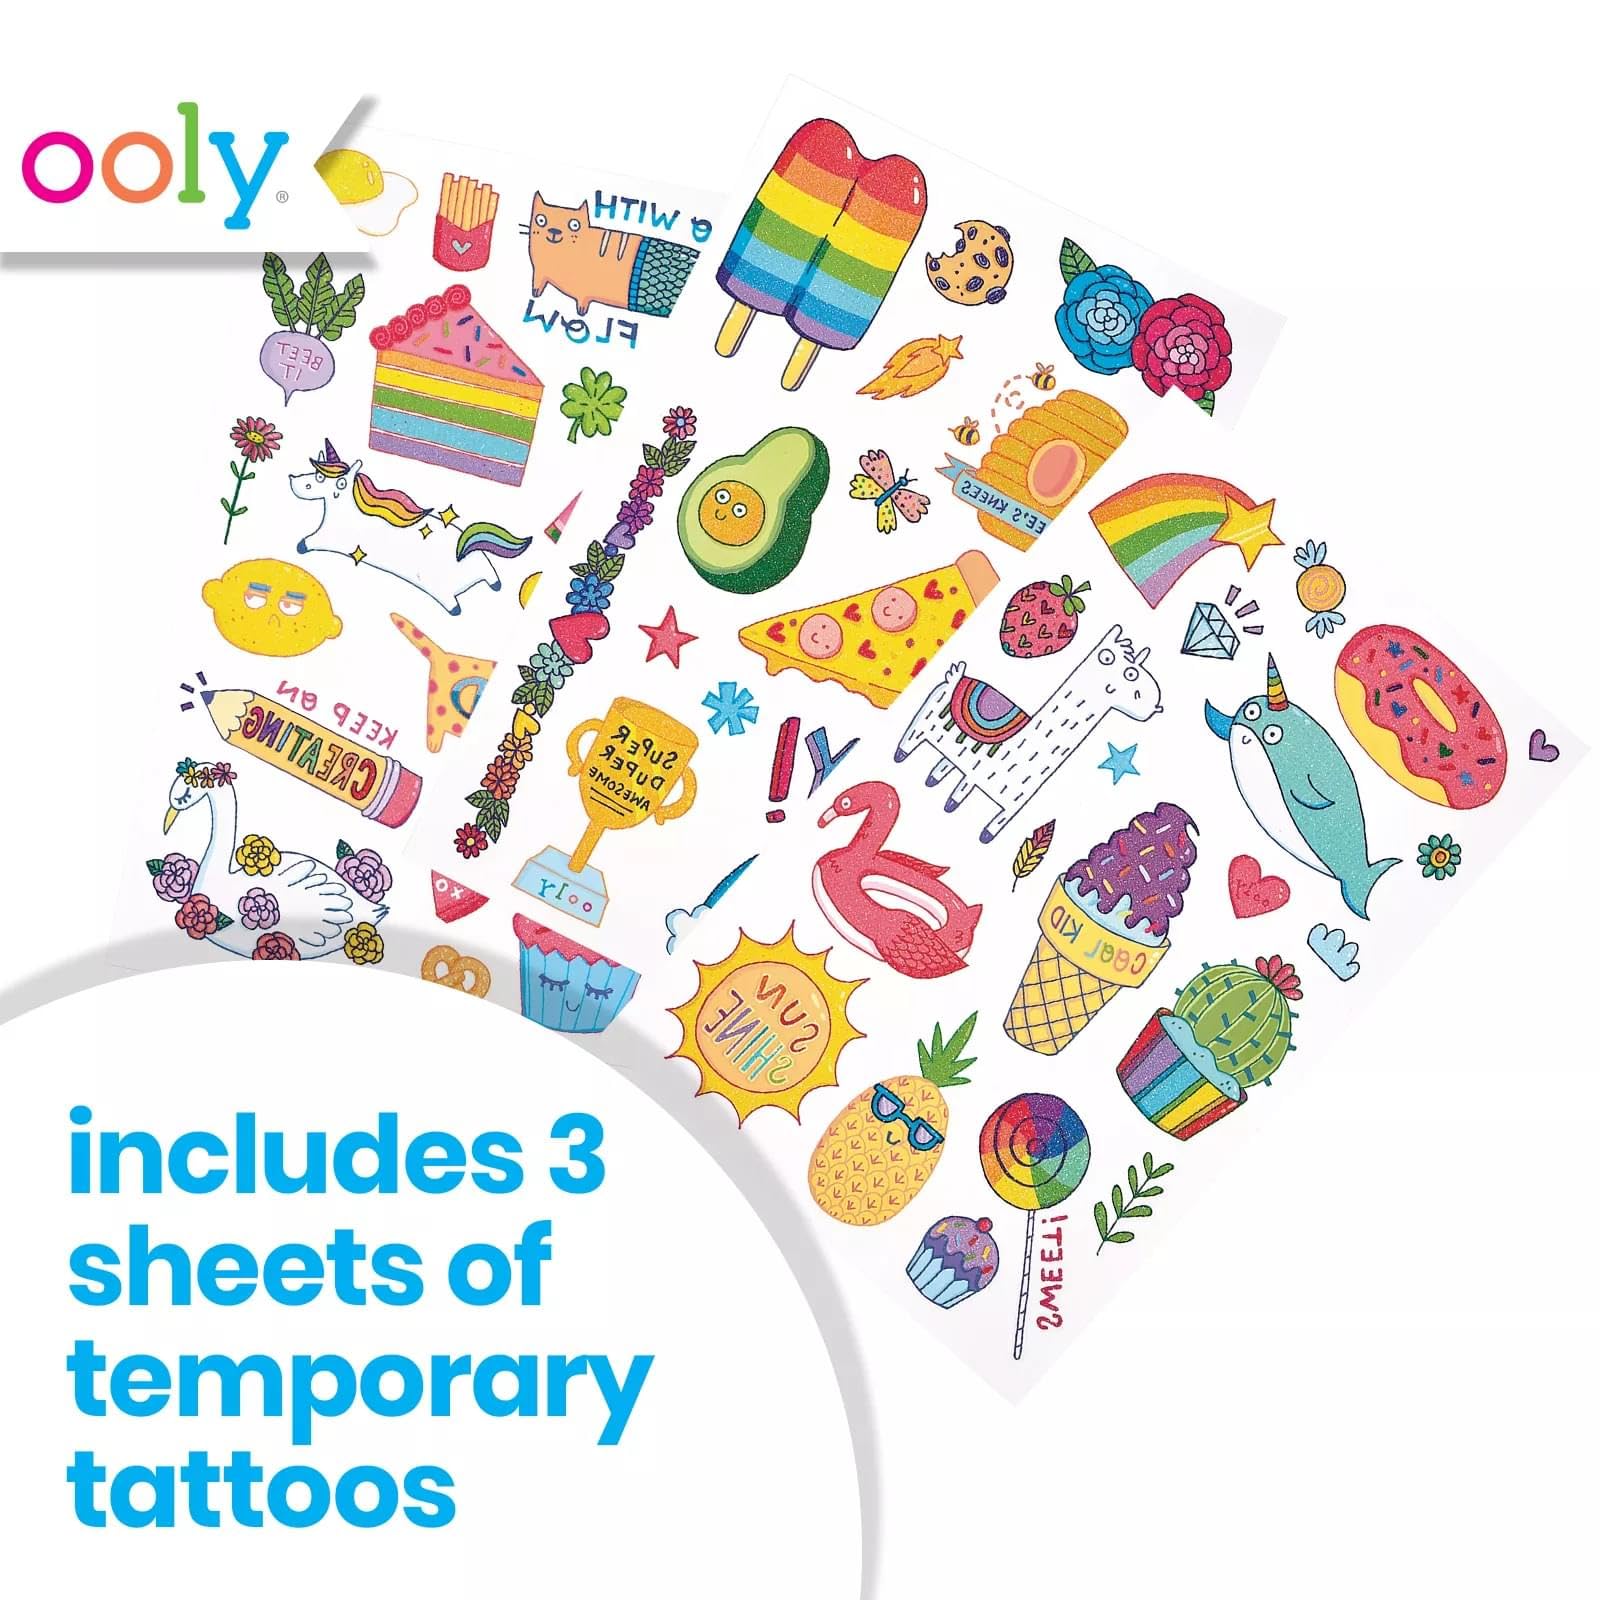 OOLY Glitter Tattoo-Palooza Over 50 Safe Non-Toxic Temporary Tattoos for Kids, Fake Tattoos as Party Favors for kids 4-8, Goodie Bag Stuffers for Birthday Party Supplies [Cute Doodle World]